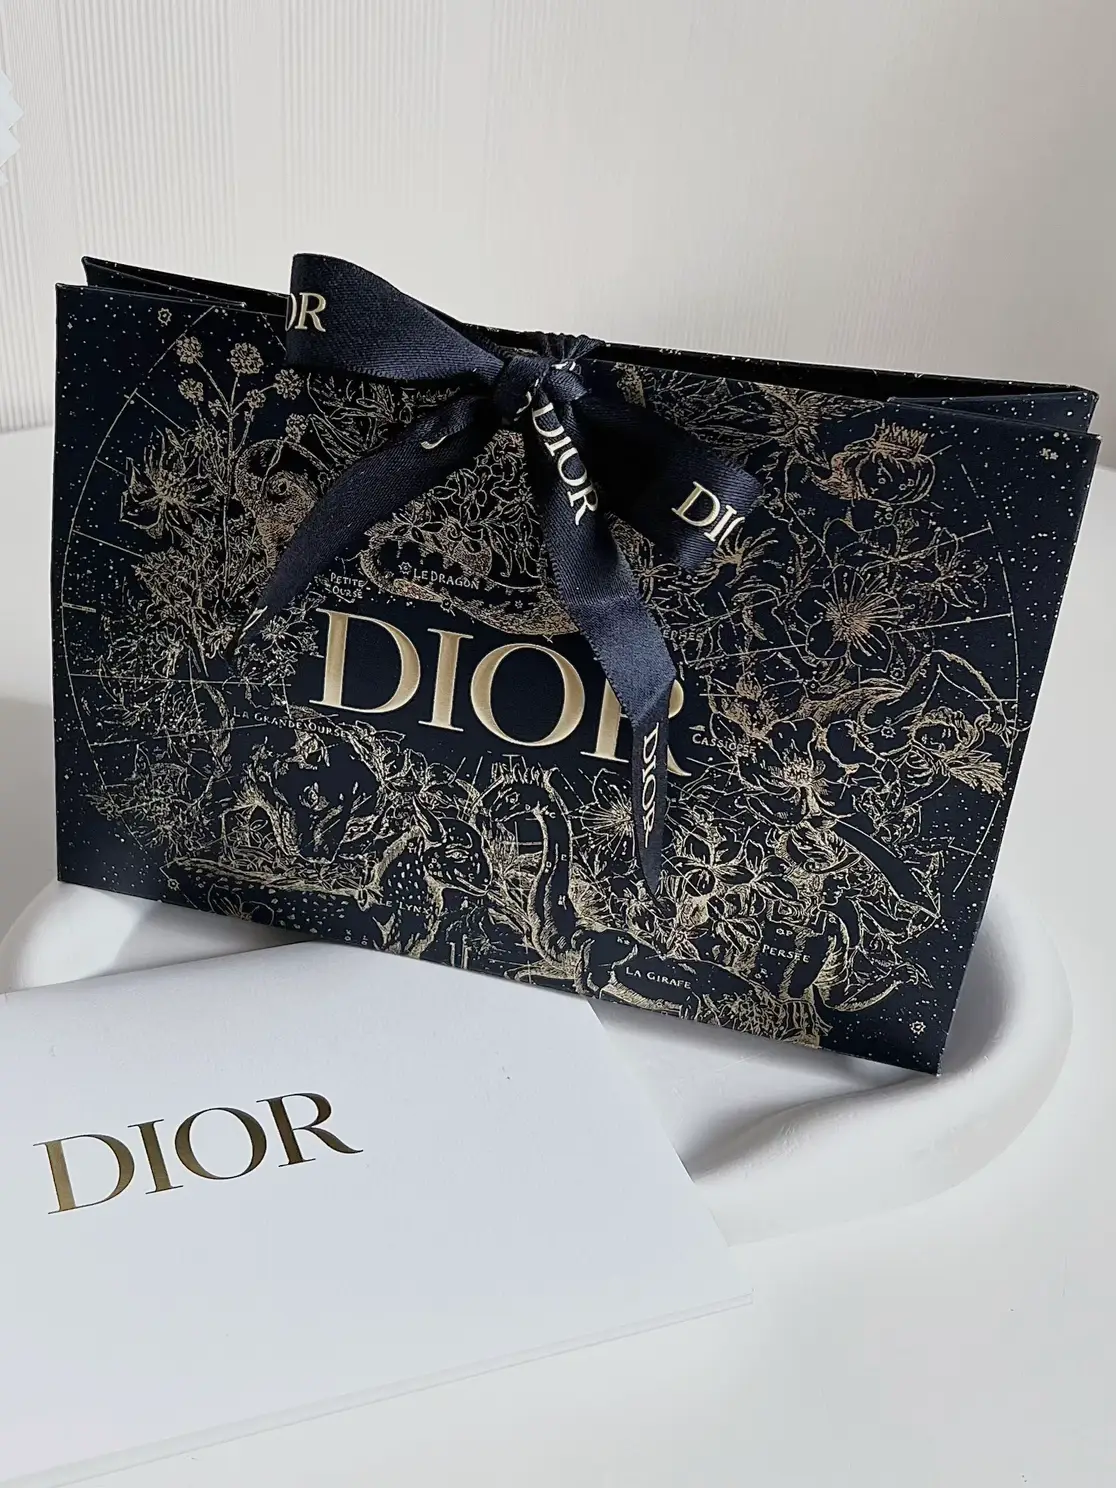 Dior Travel Pouch Review UNBOXING SPRING 2022 